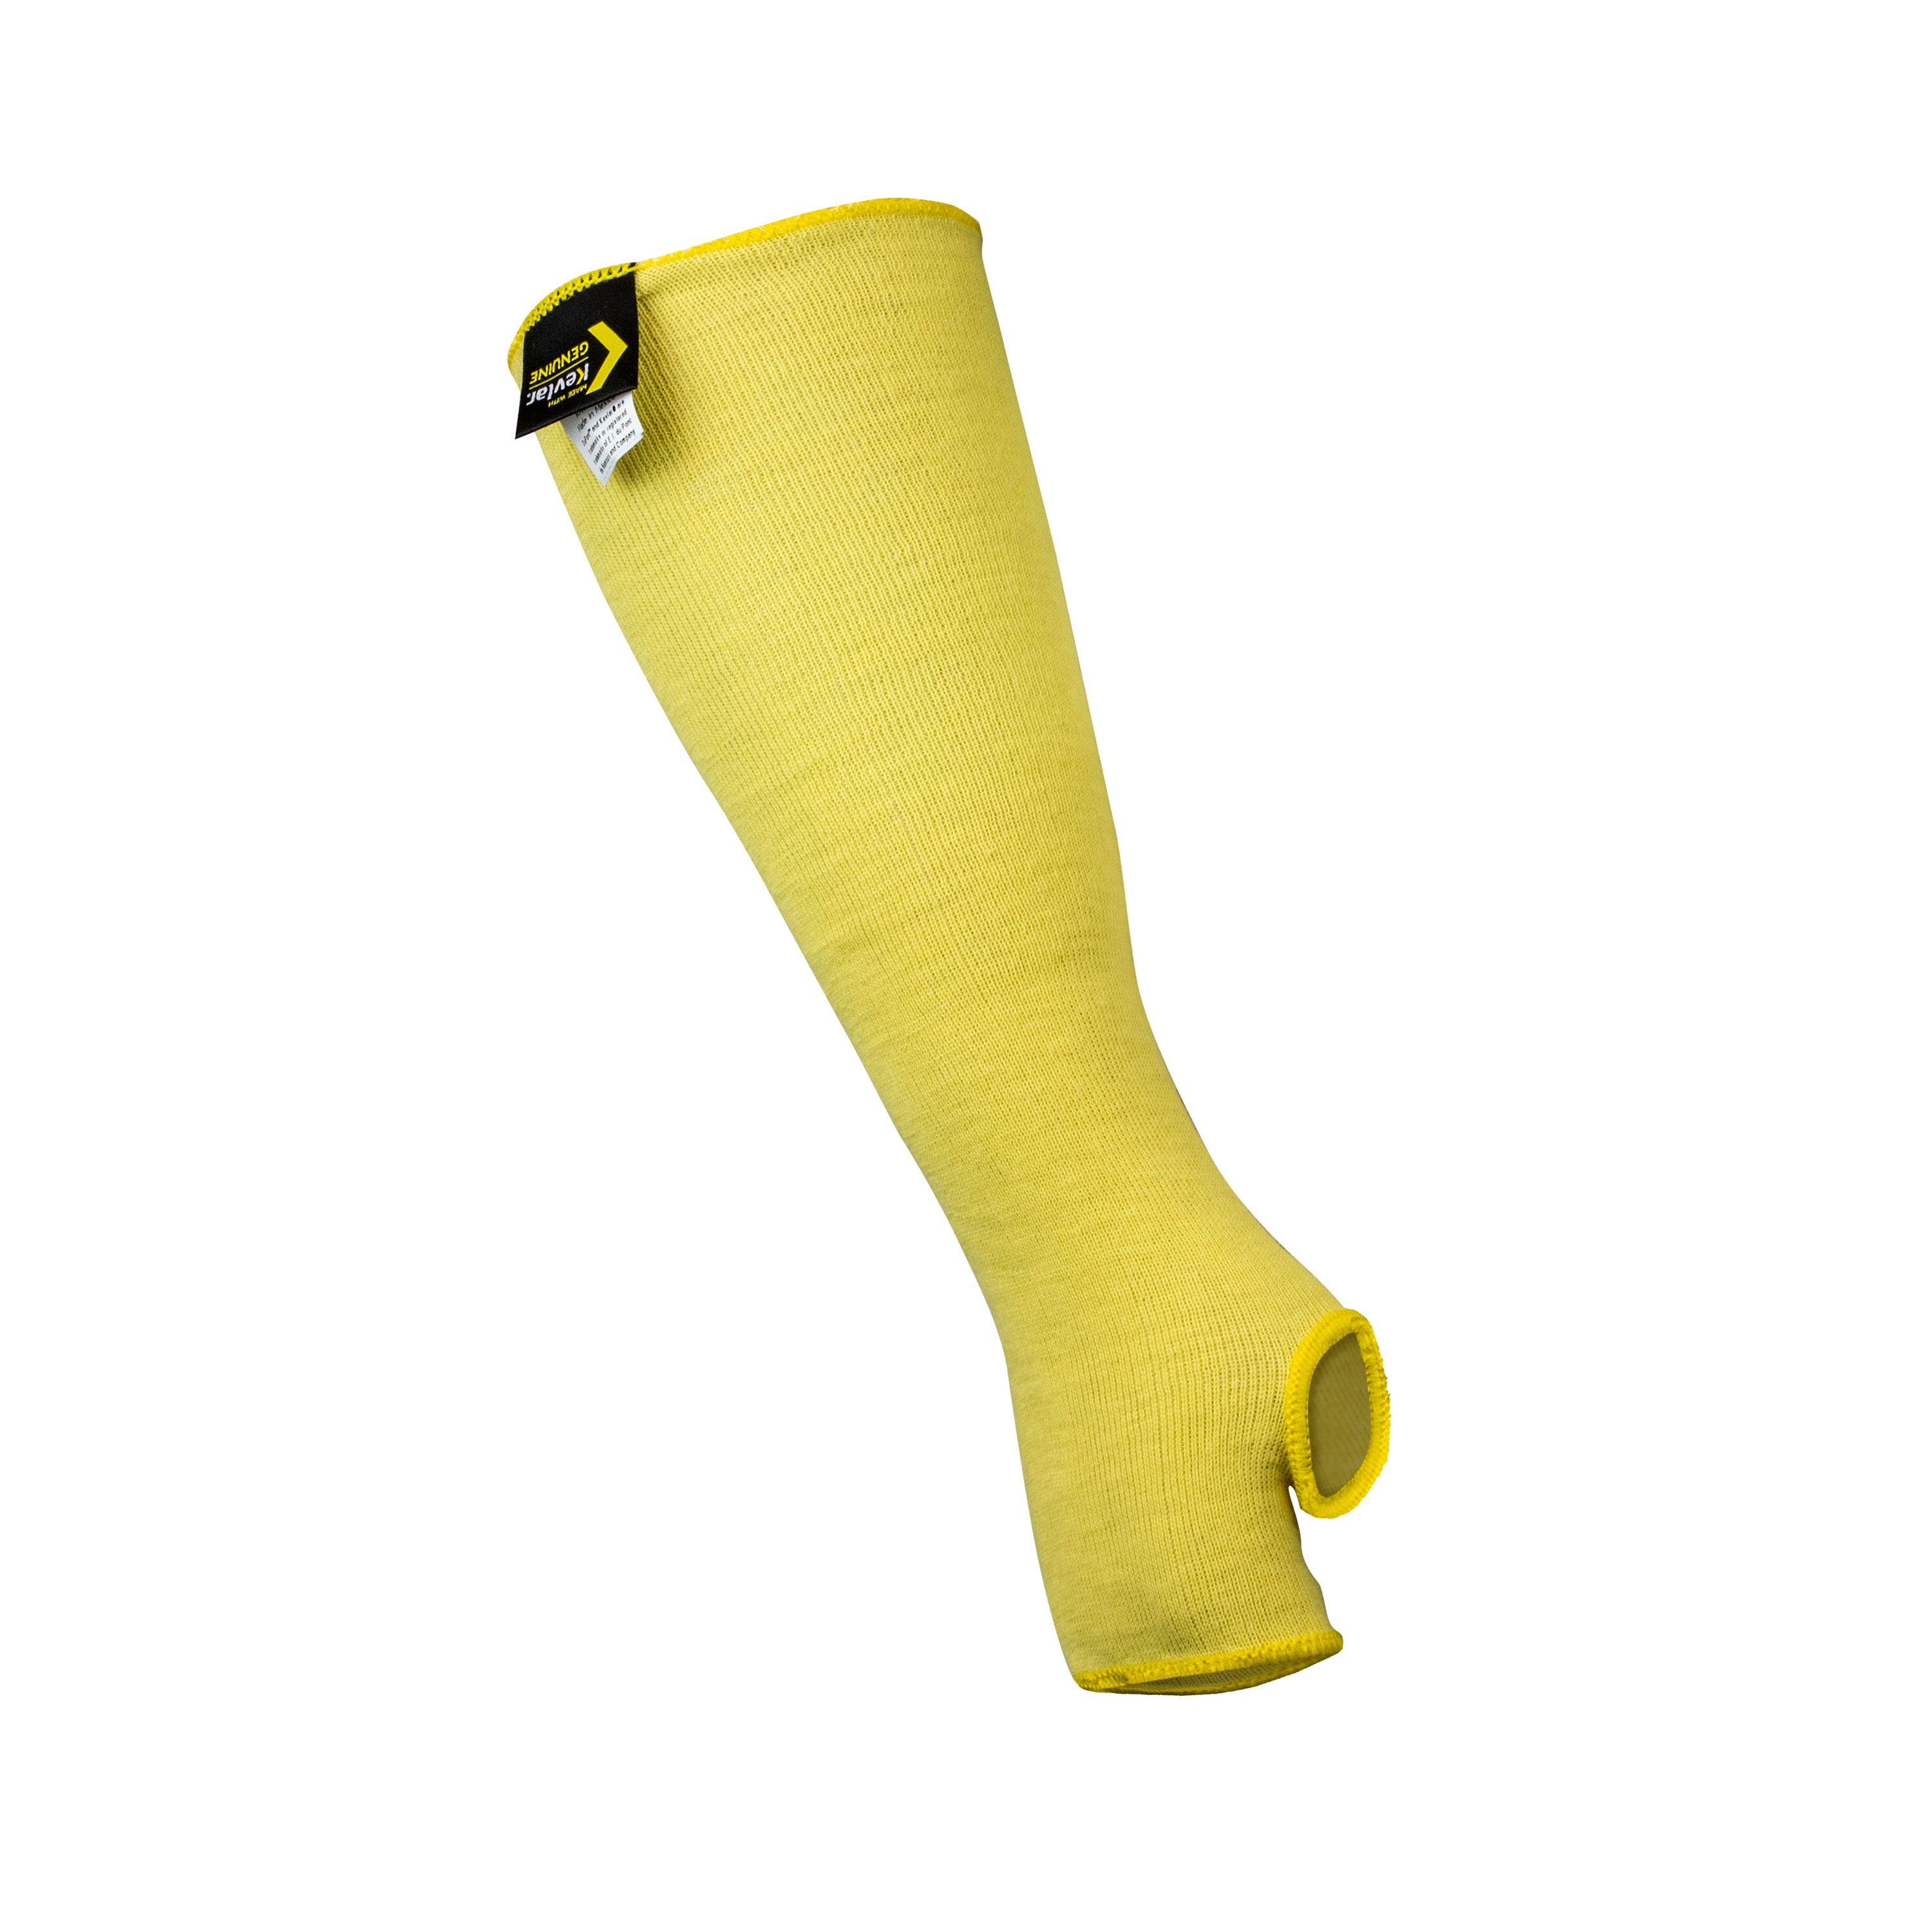 cut resistant safety socks, cut resistant safety socks Suppliers